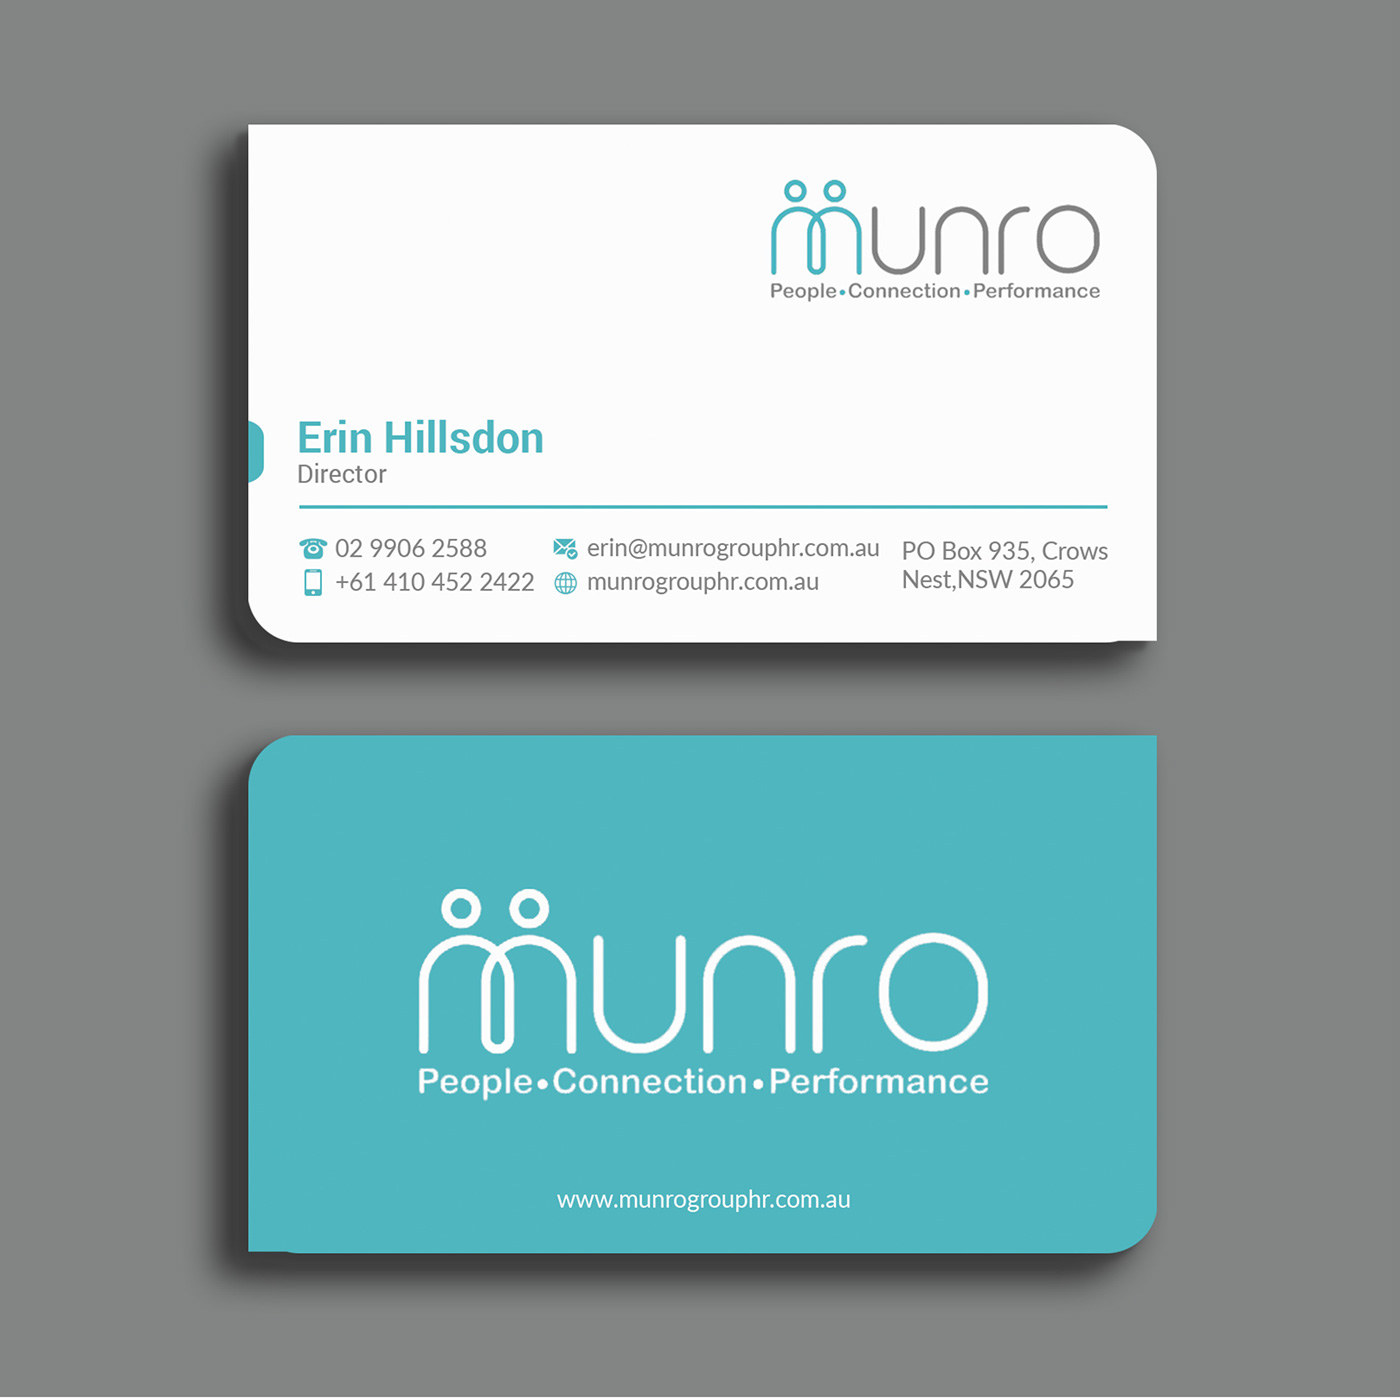 Two rounded Corners clean modern simple design